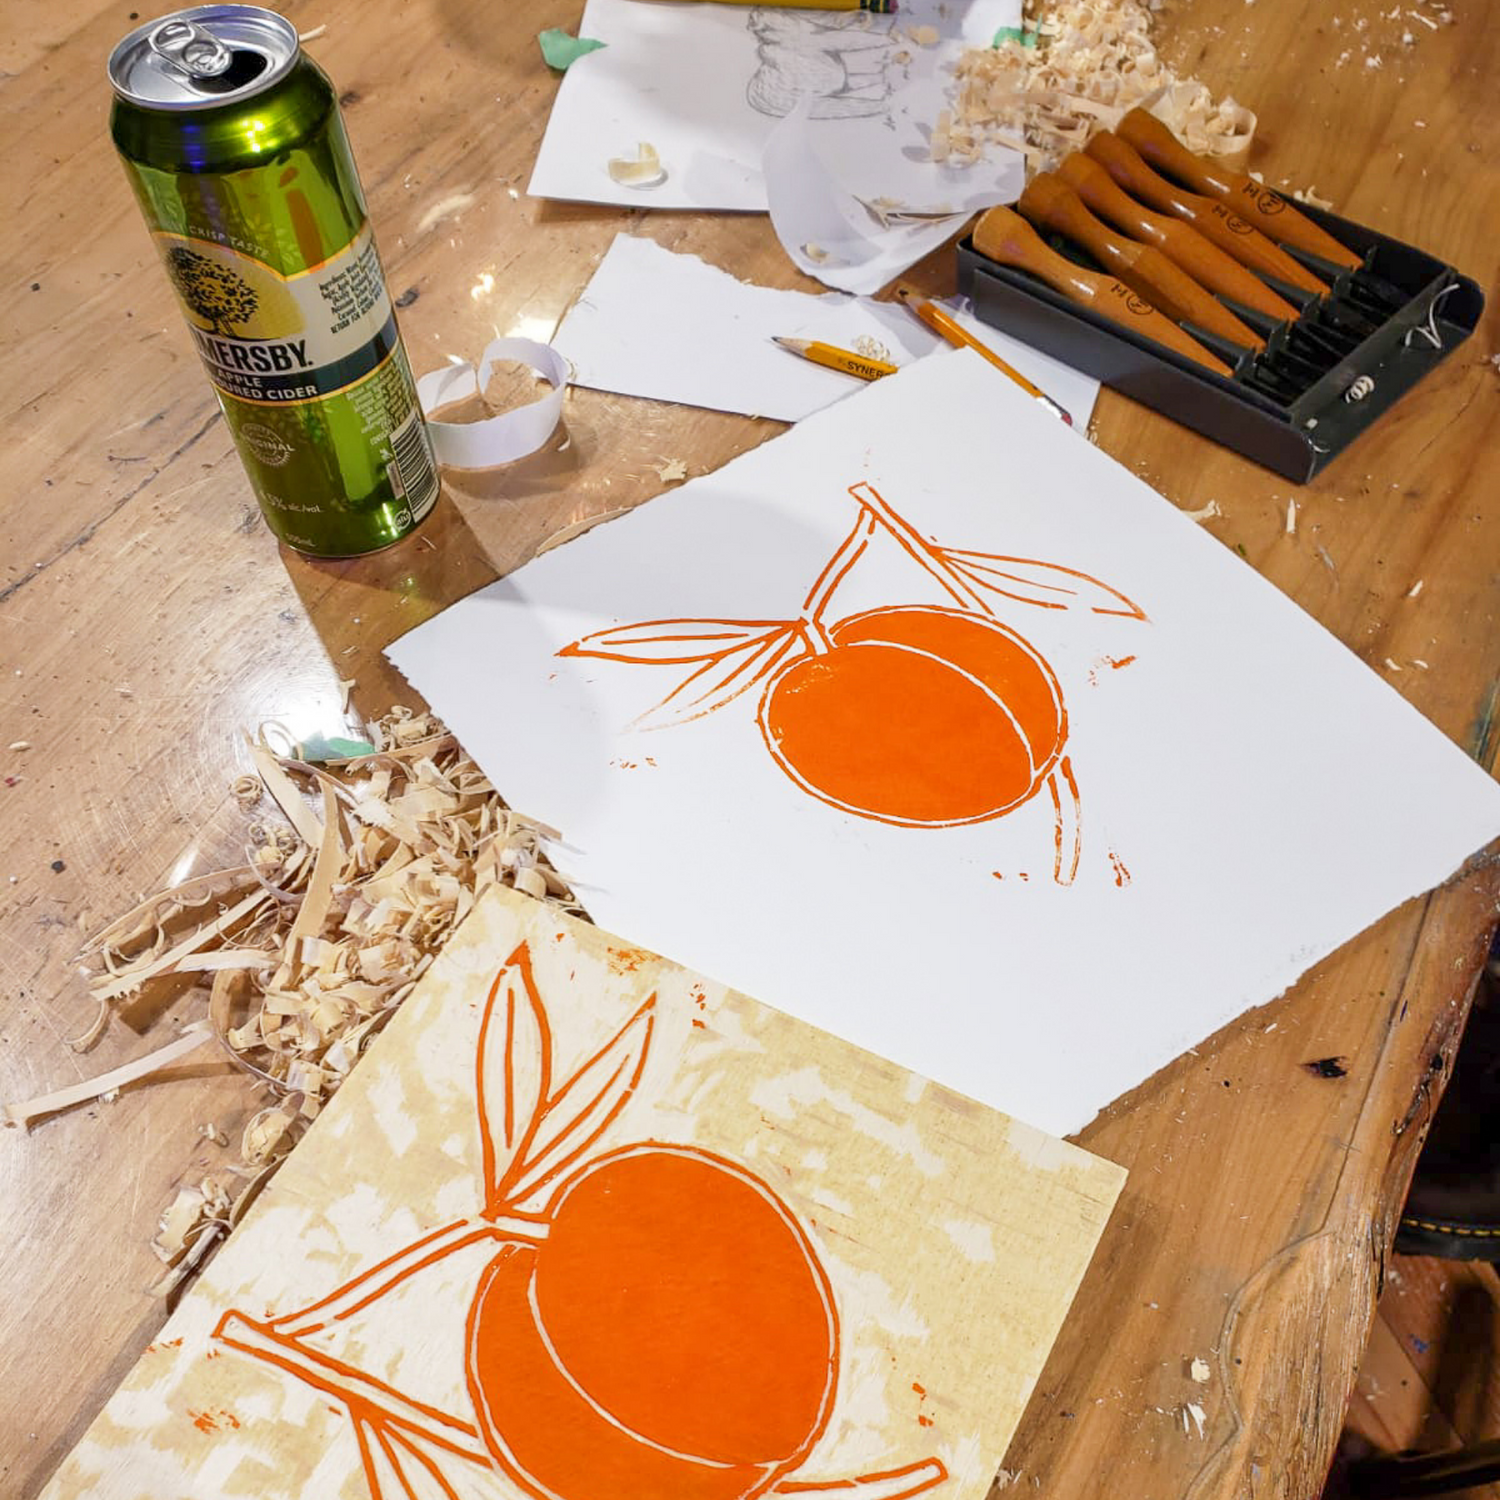 Printmaking activity at Paint Cabin in Toronto